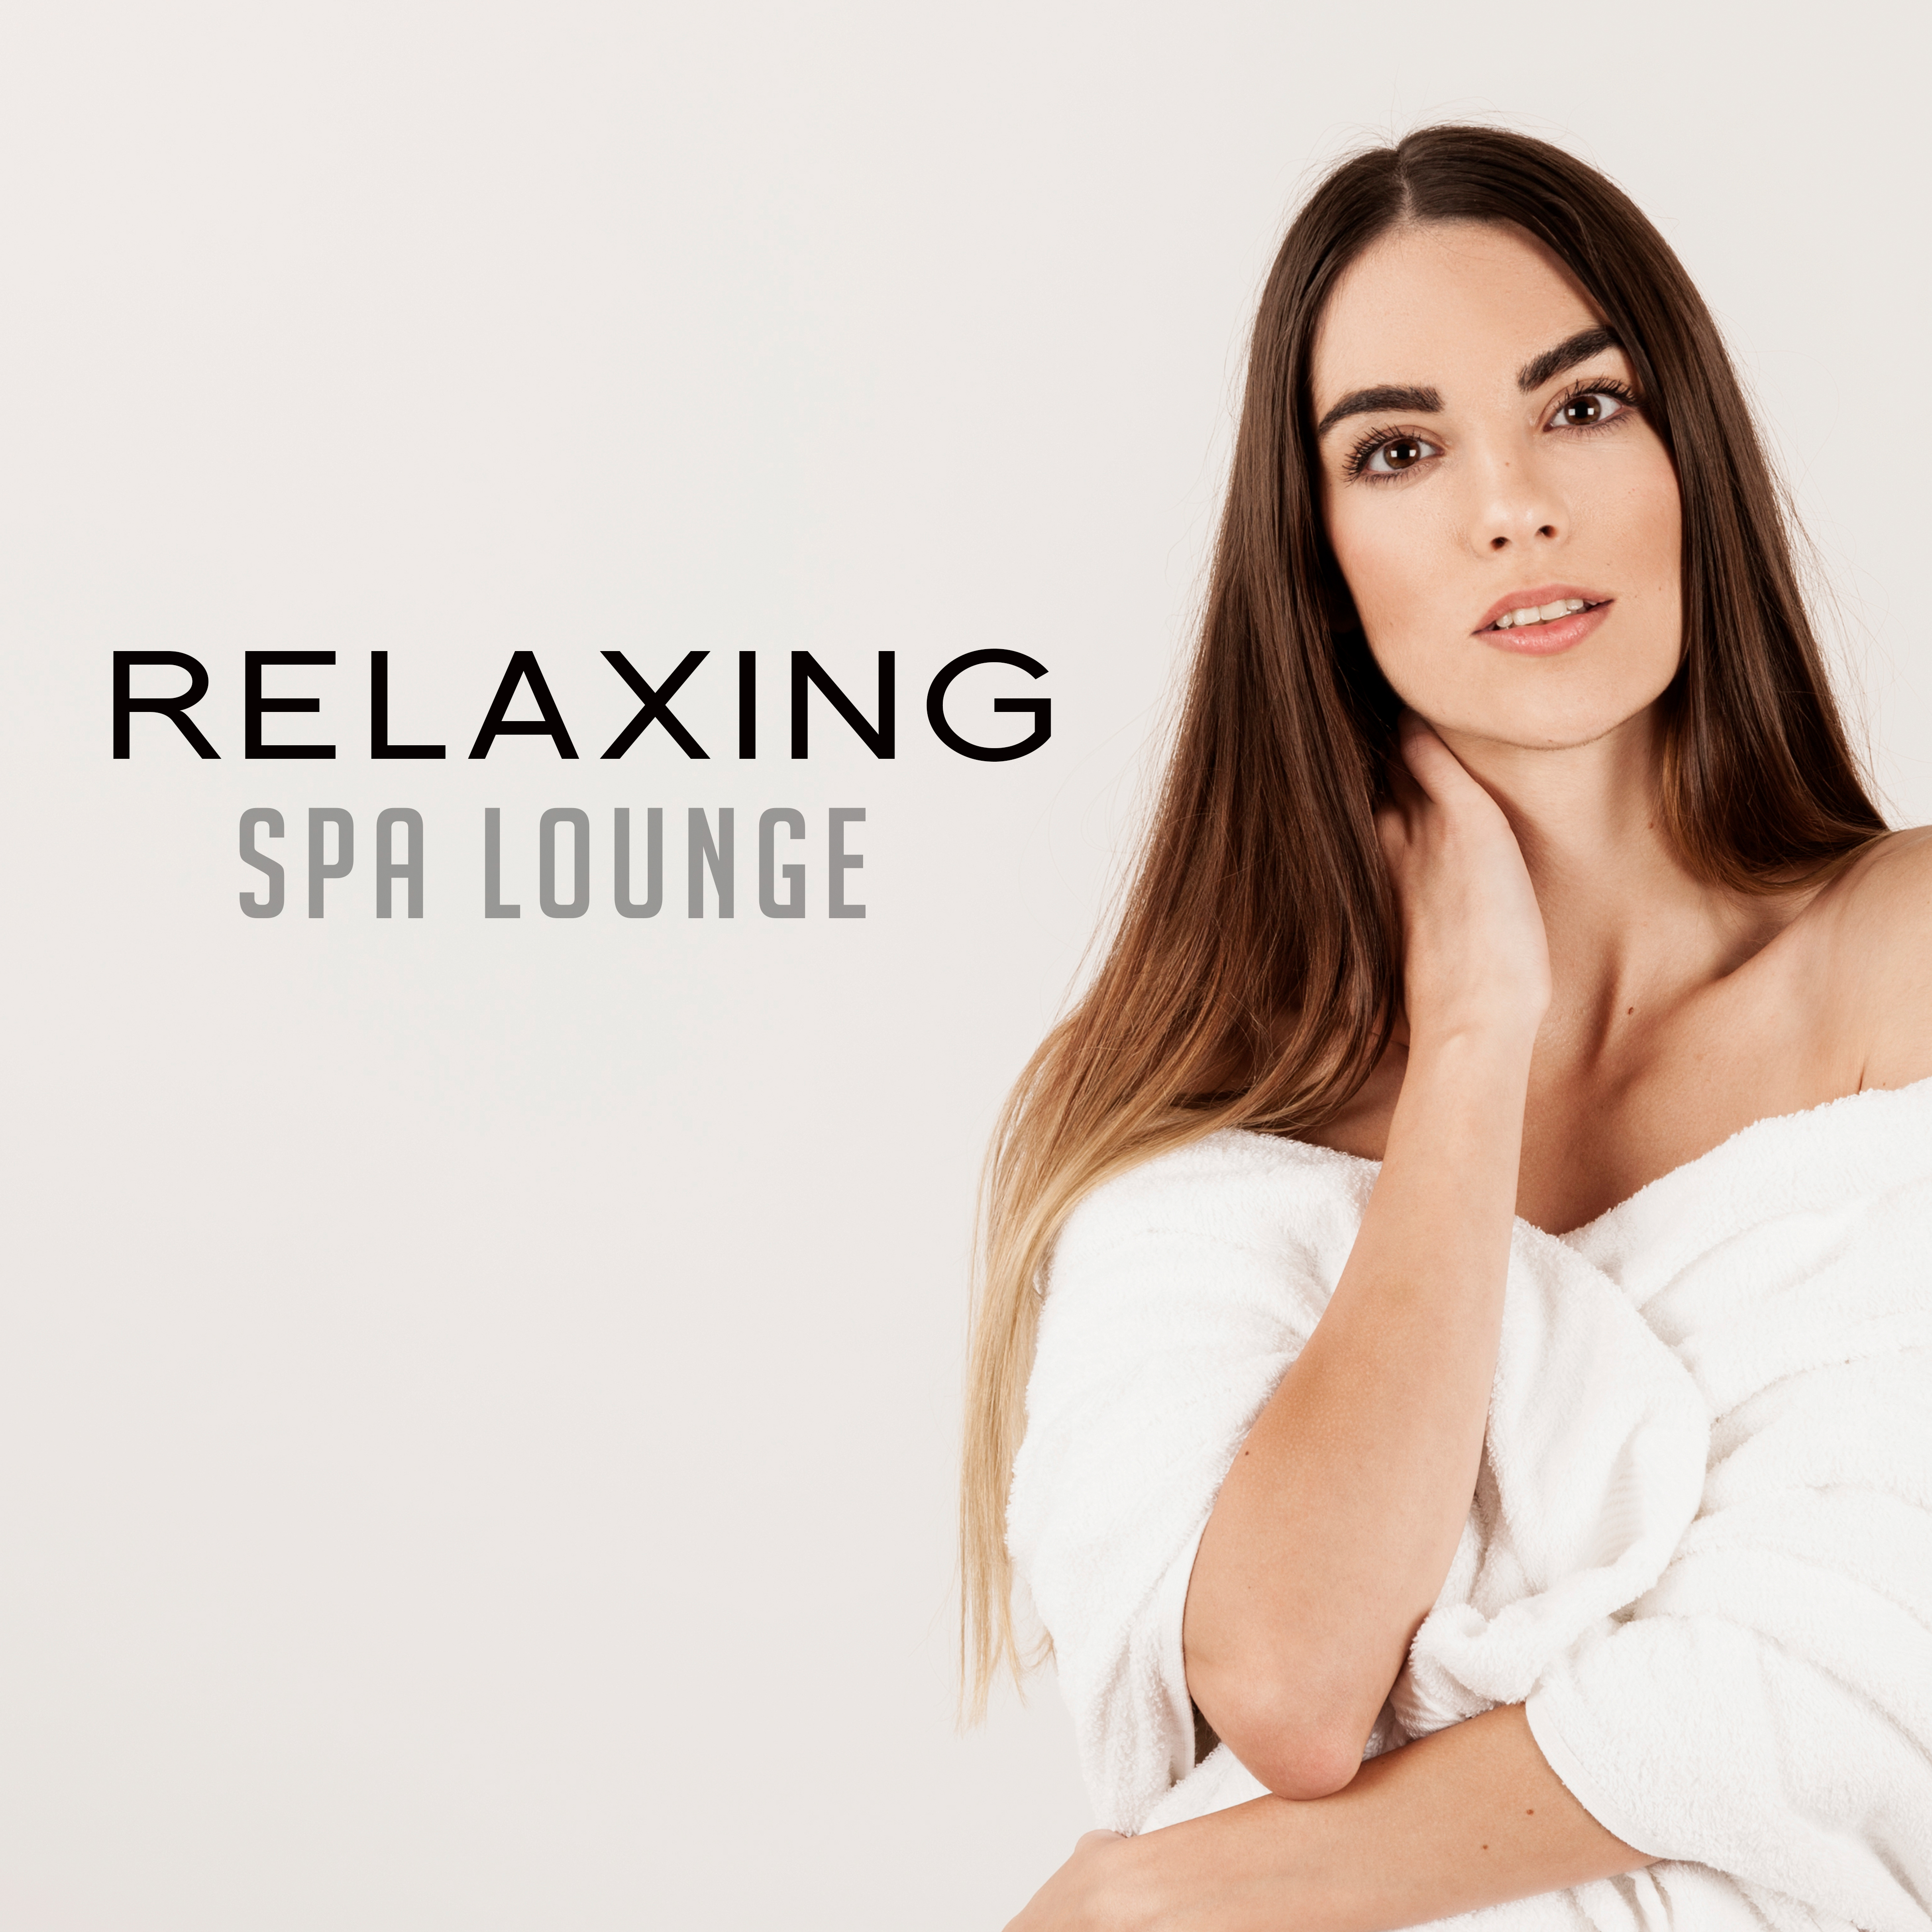 Relaxing Spa Lounge